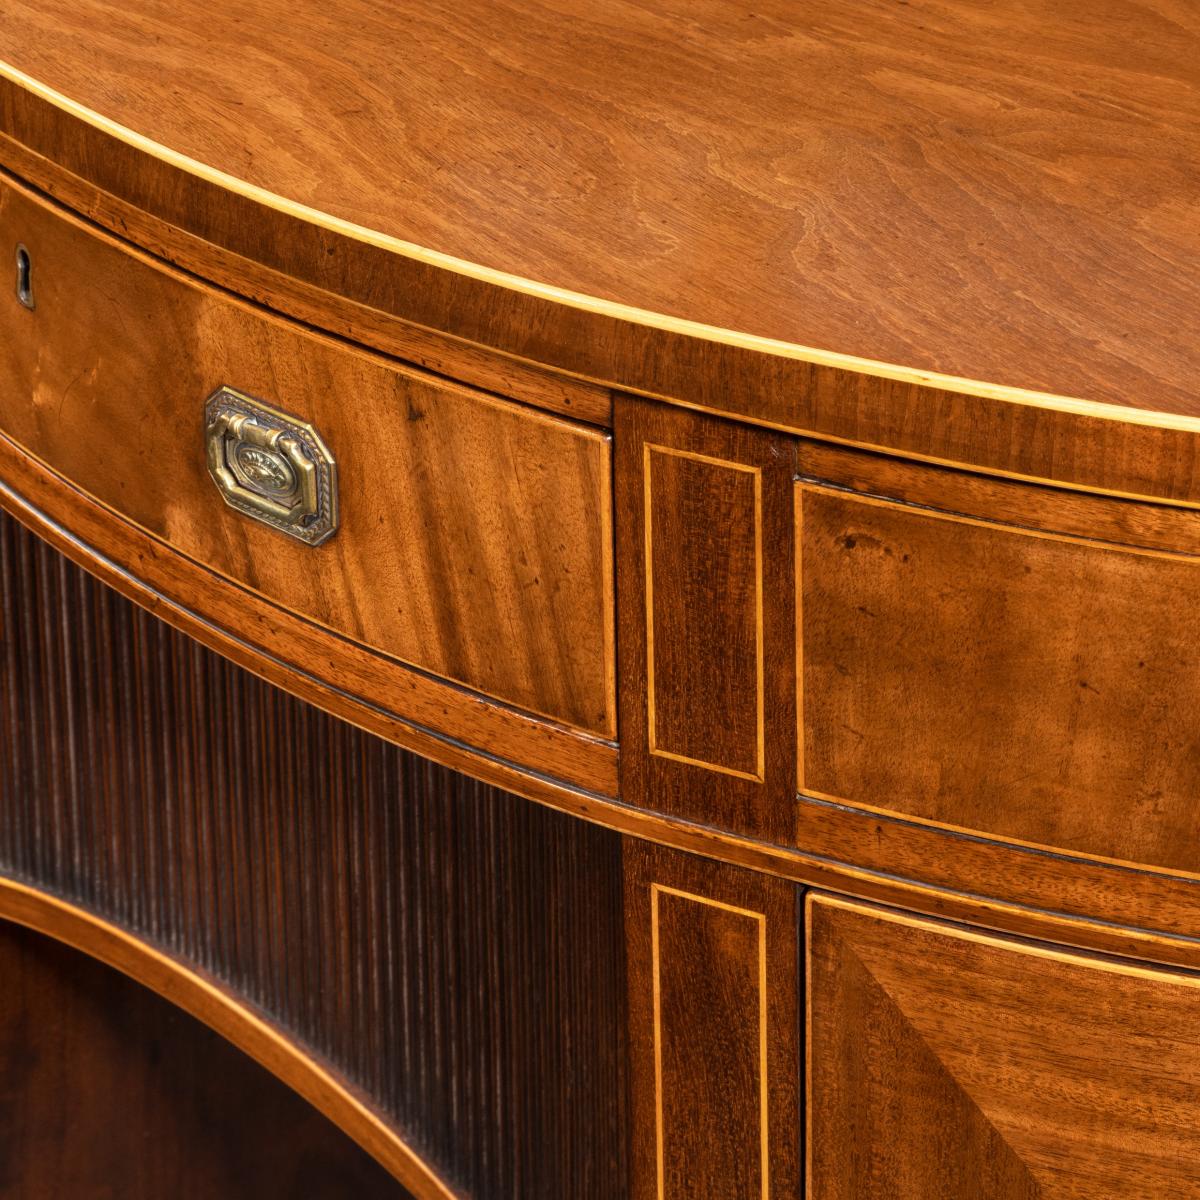 A fine pair of George III figured mahogany side cabinets, in the manner of Thomas Sheraton